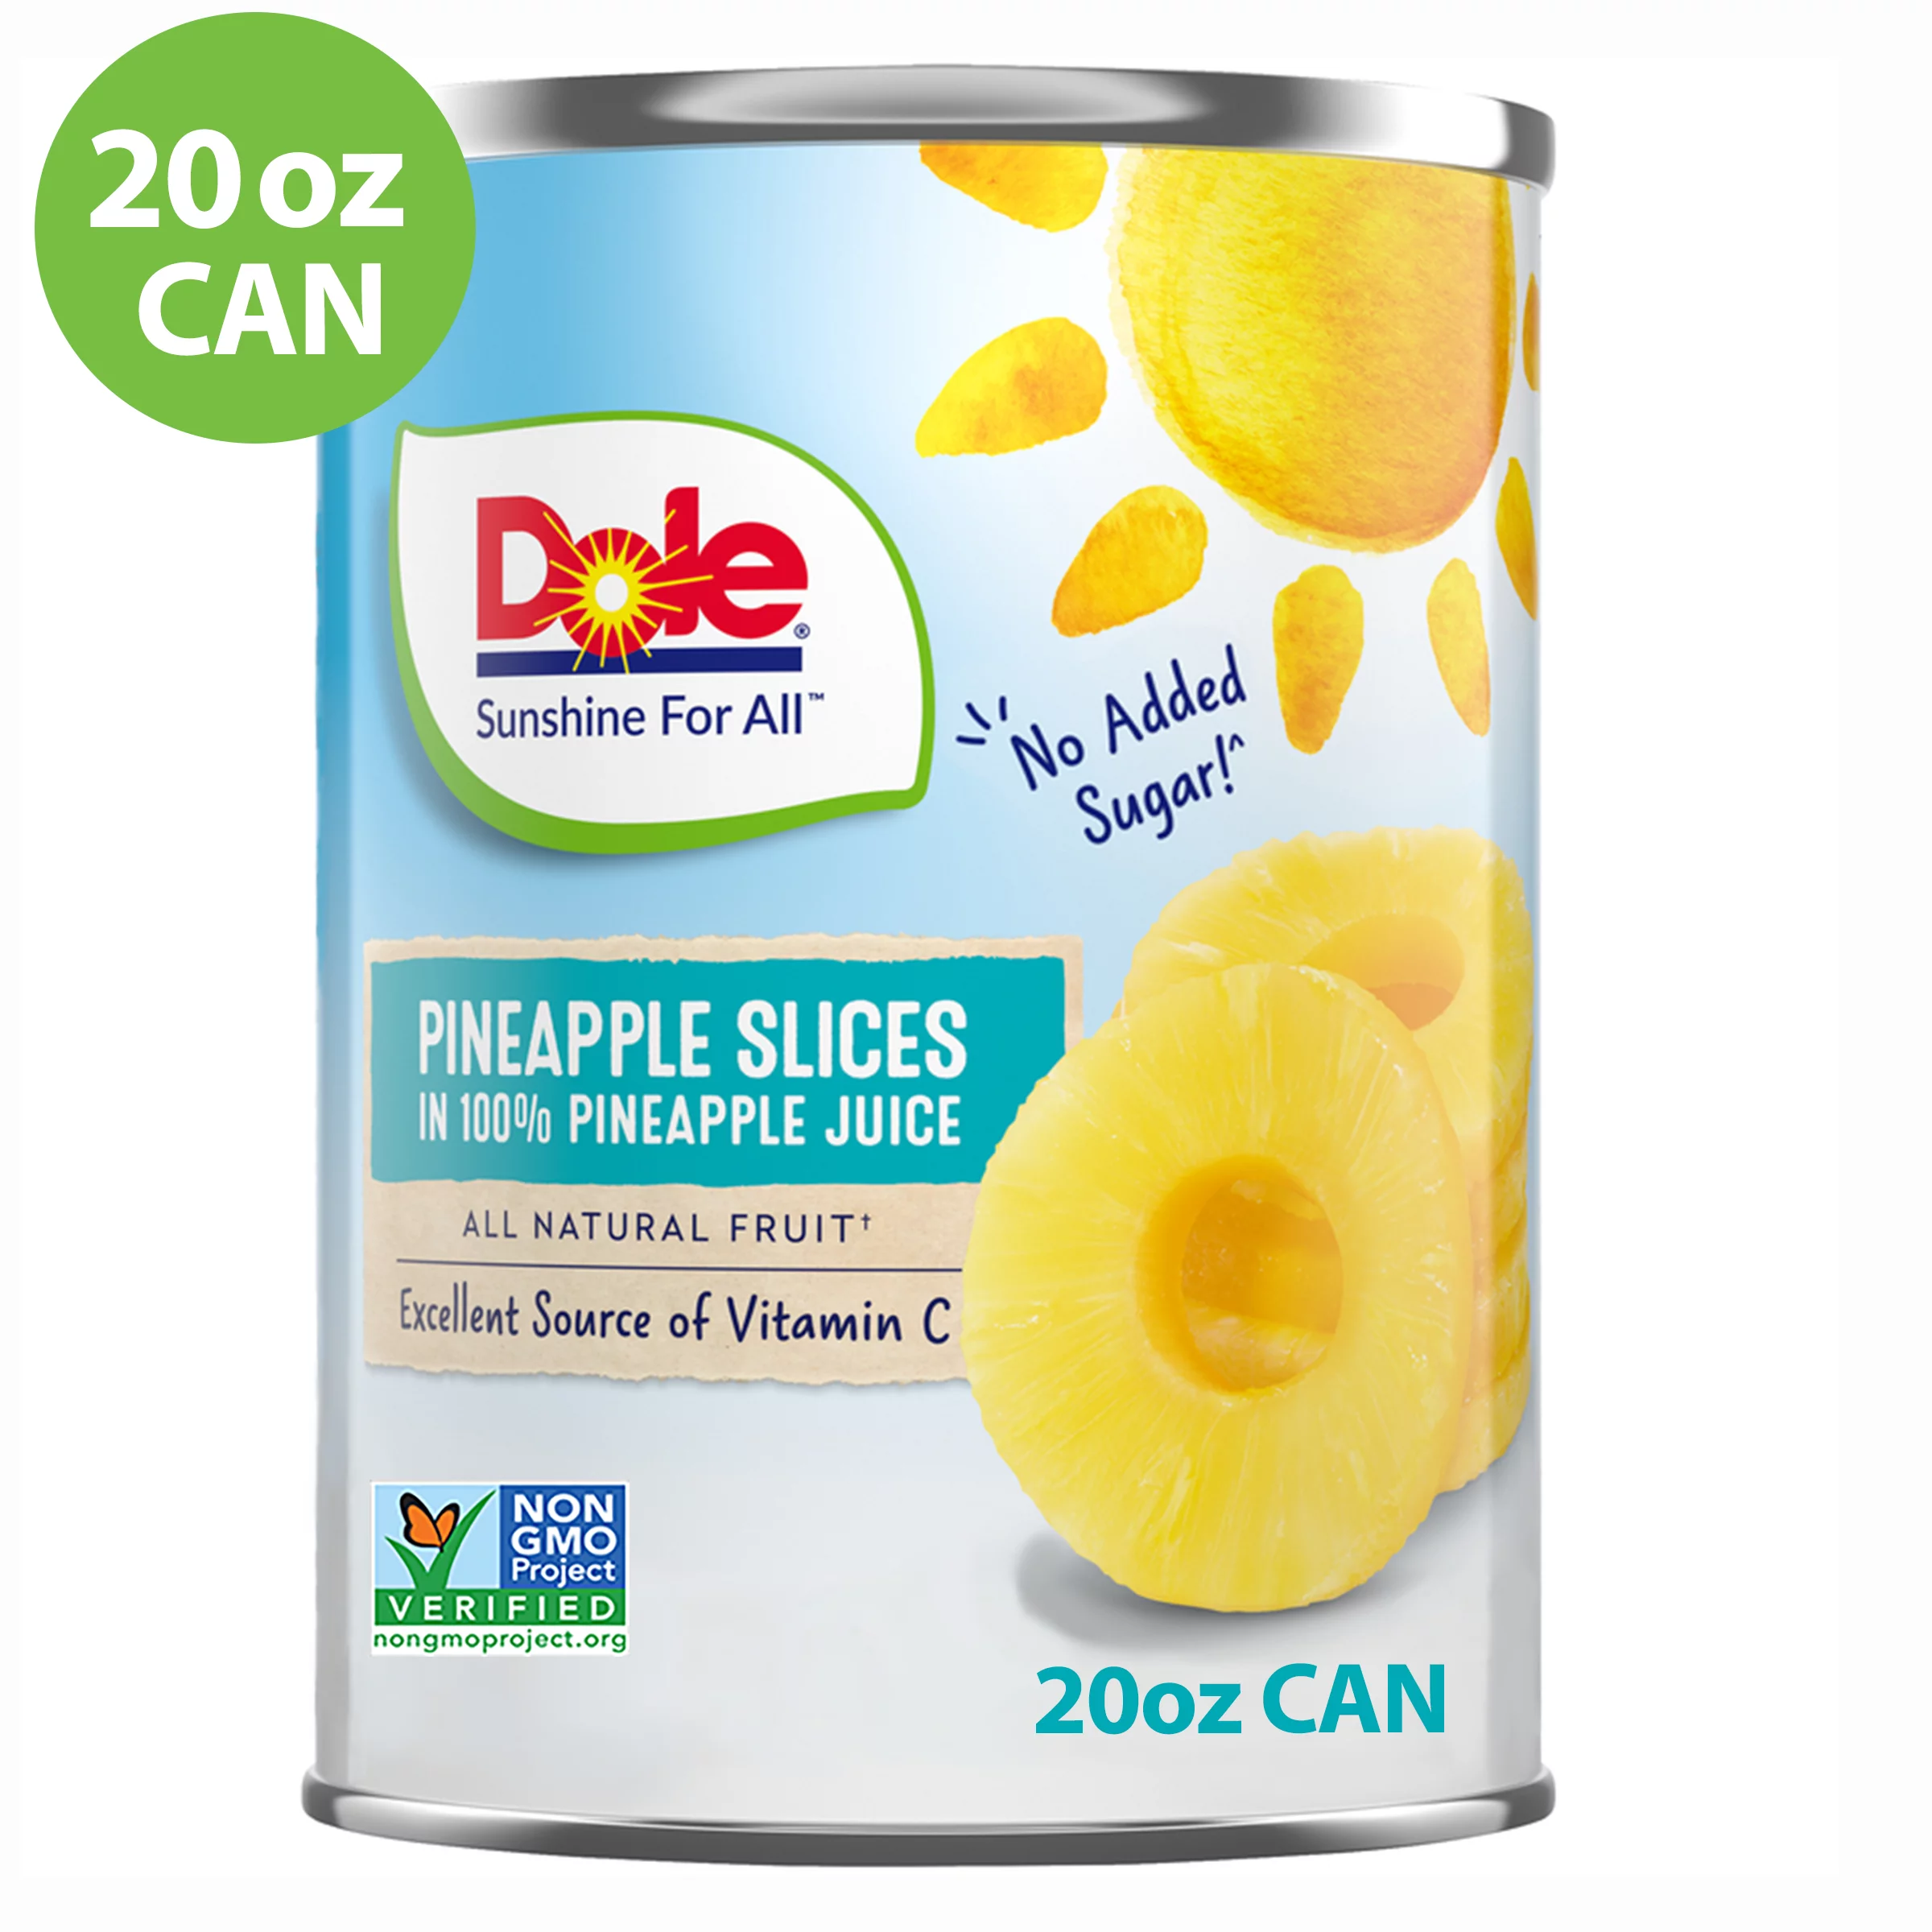 Dole Pineapple Slices in 100% Pineapple Juice, 20 oz Can